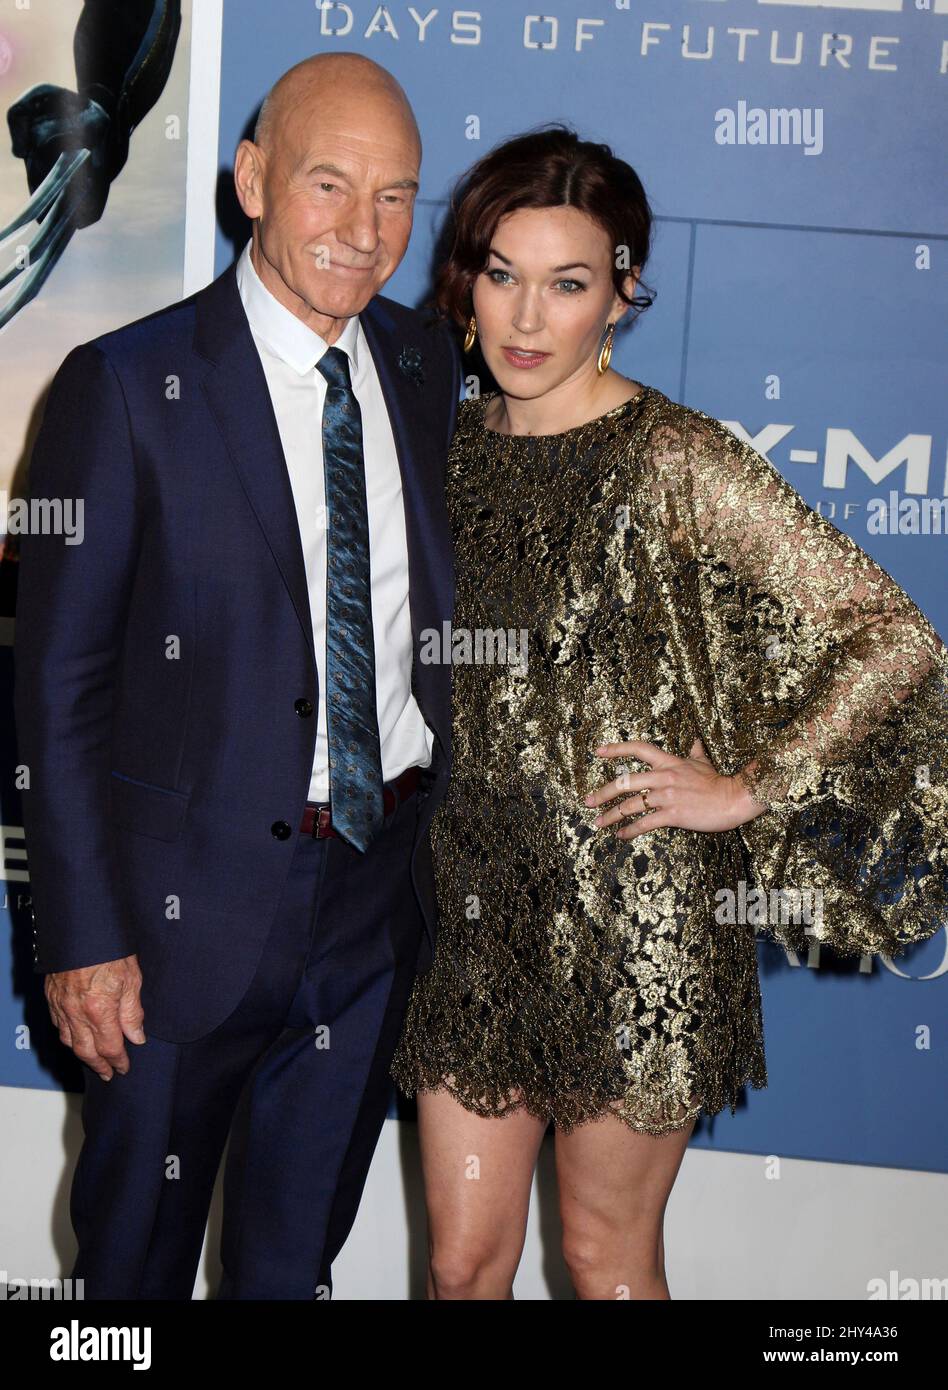 Patrick Stewart and Sophie Alexandra attending the 'X-Men: Days Of Future Past' World Premiere at the Jacob Javits Center on May 10, 2014. Stock Photo